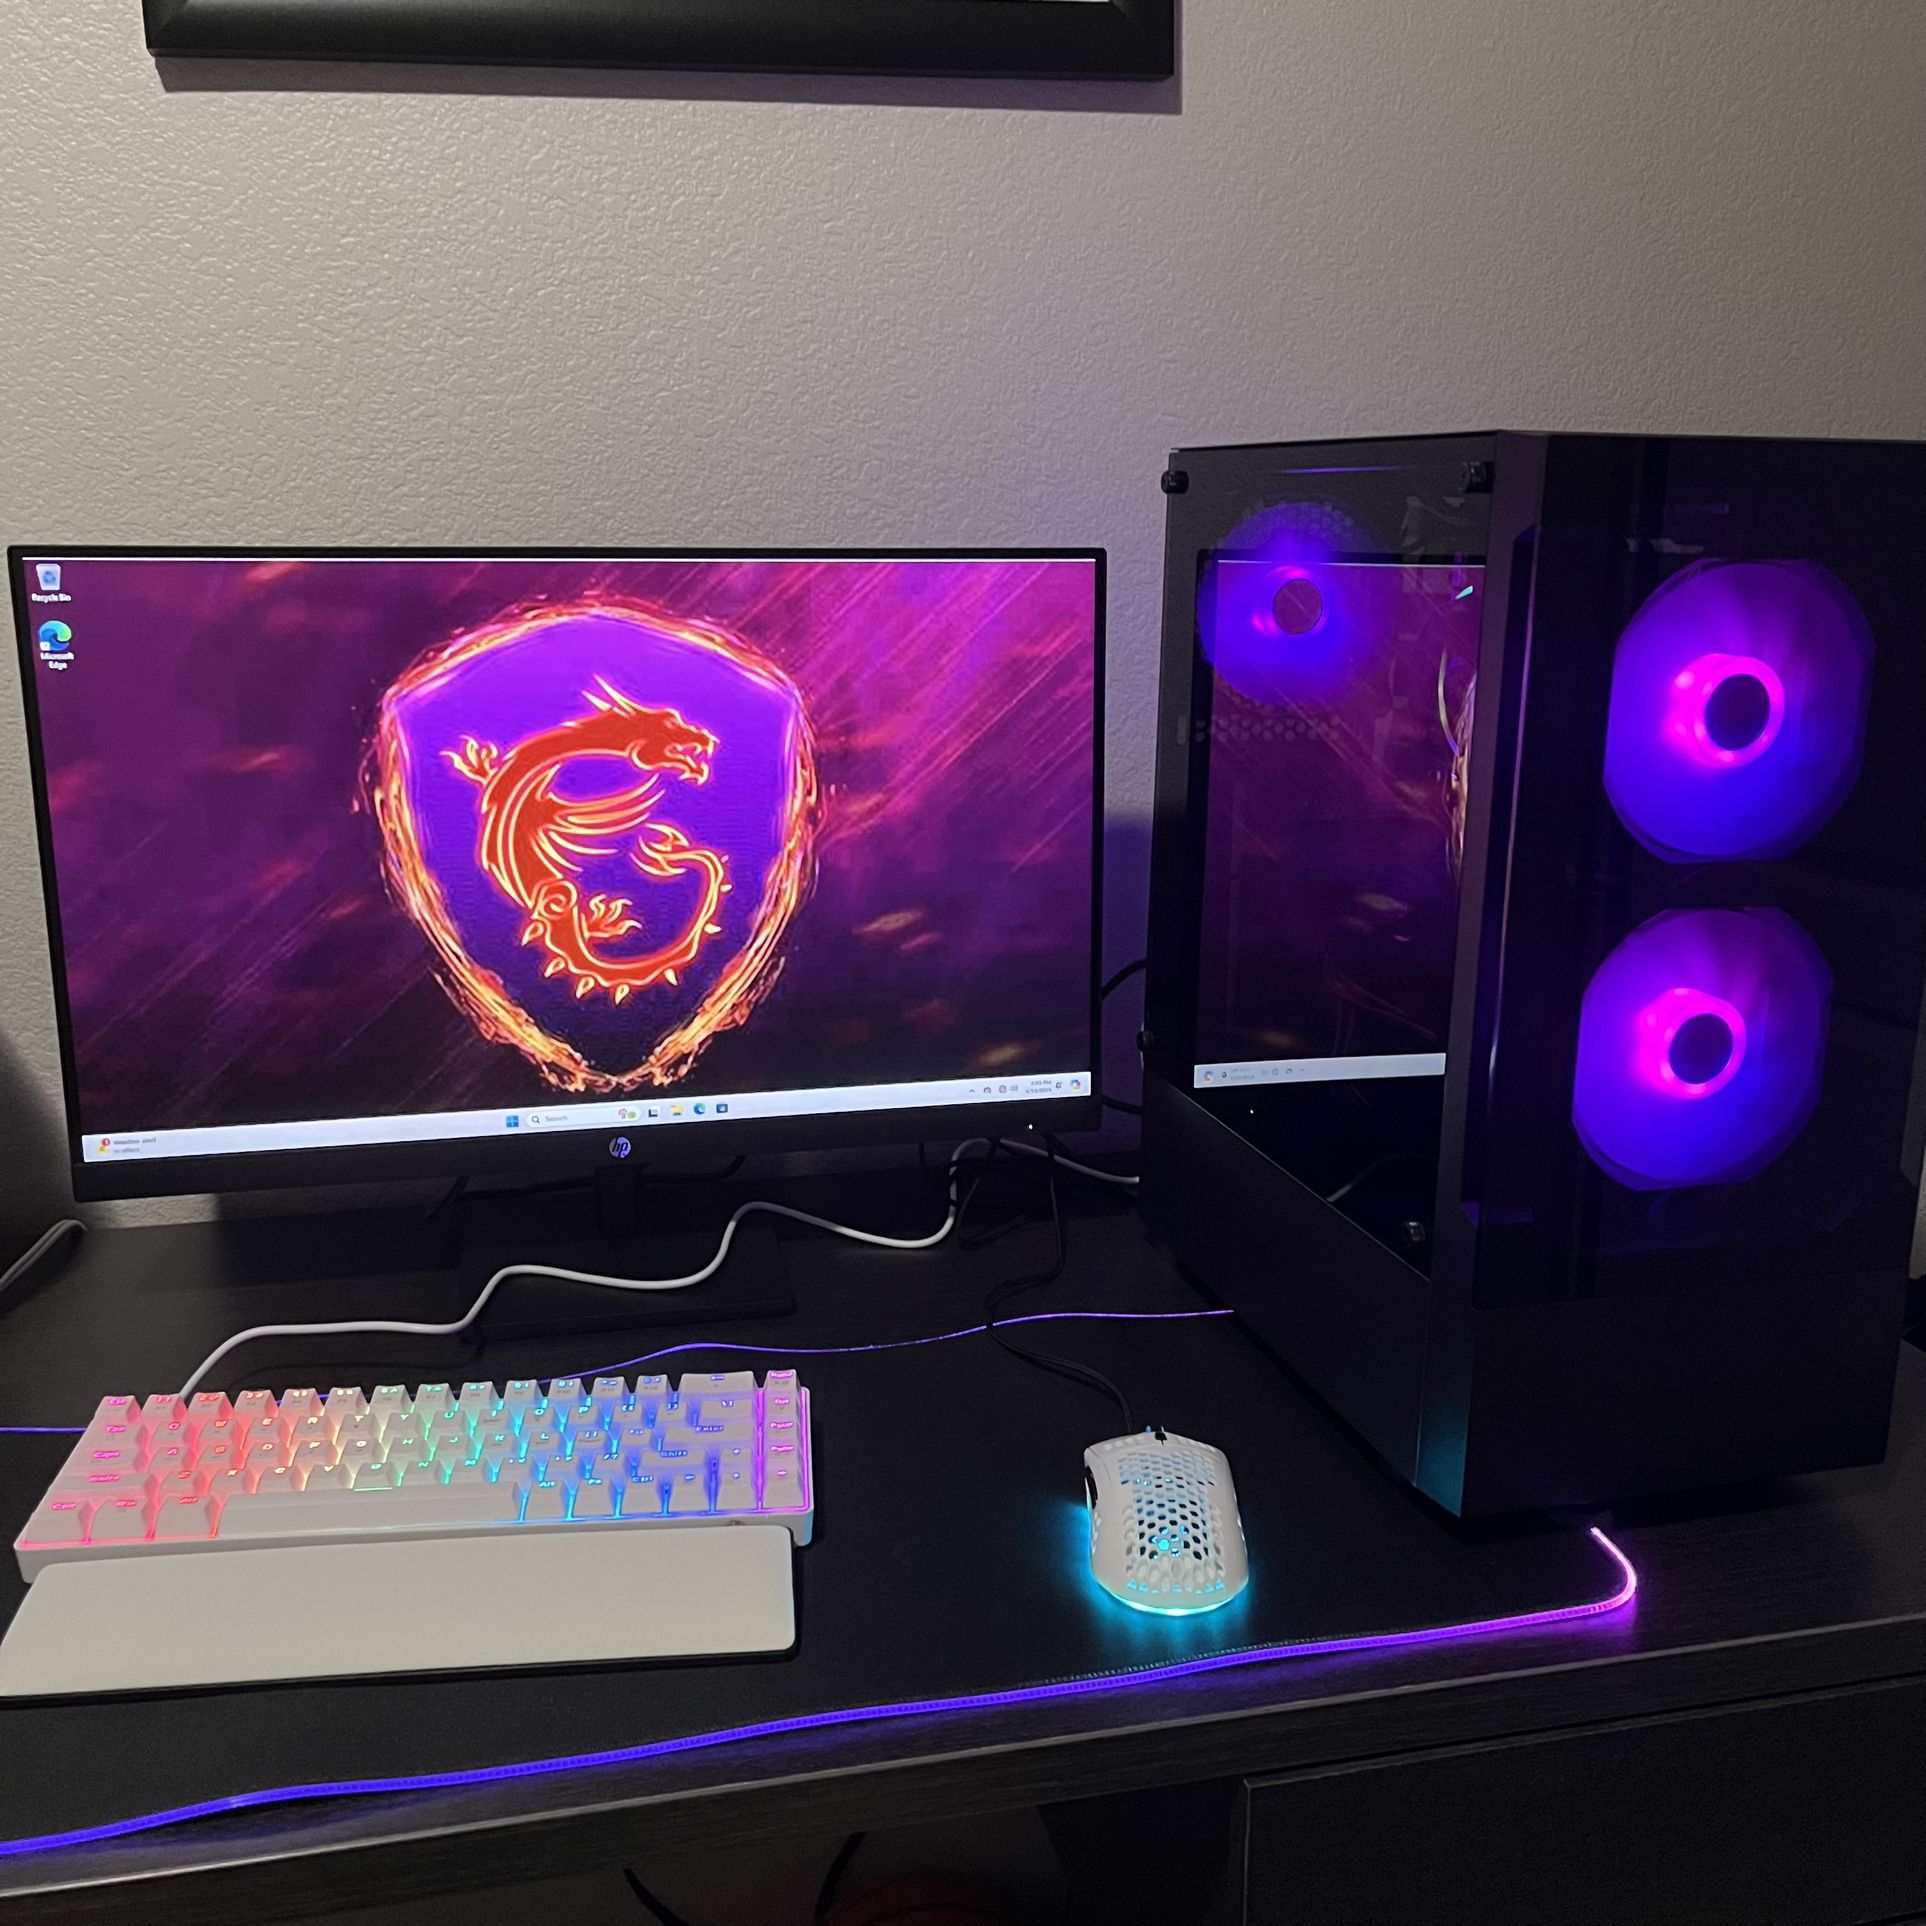 *SALE* High End RGB Gaming PC + Full Setup Included 